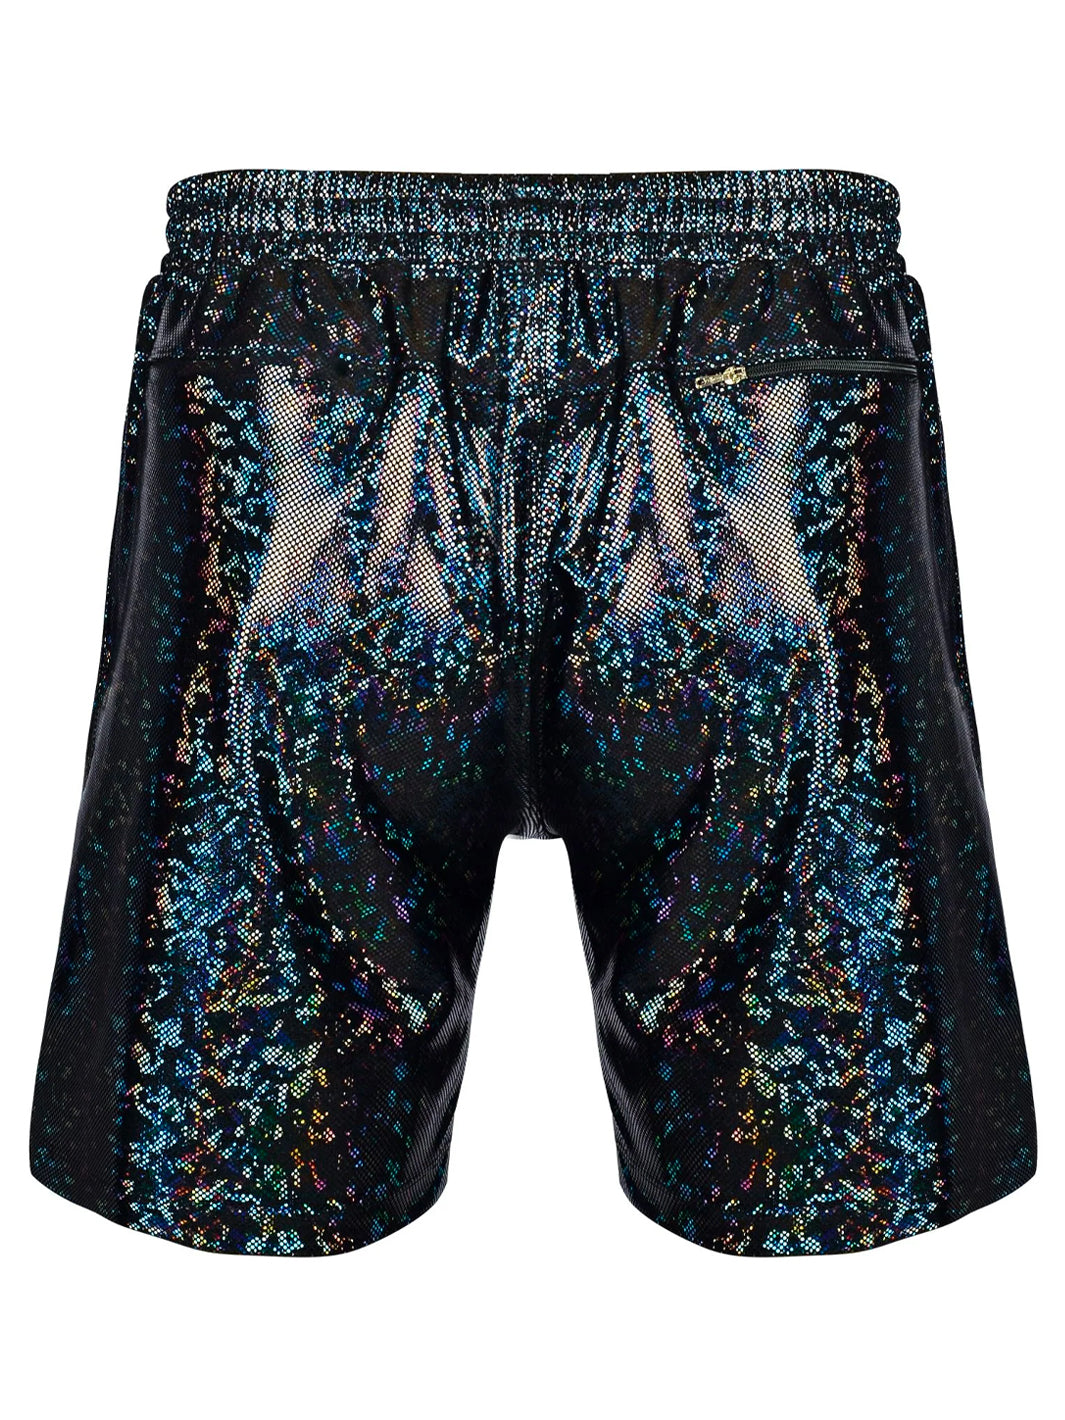 ULTIMATE HOLOGRAPHIC MENS SHORTS - SILVER